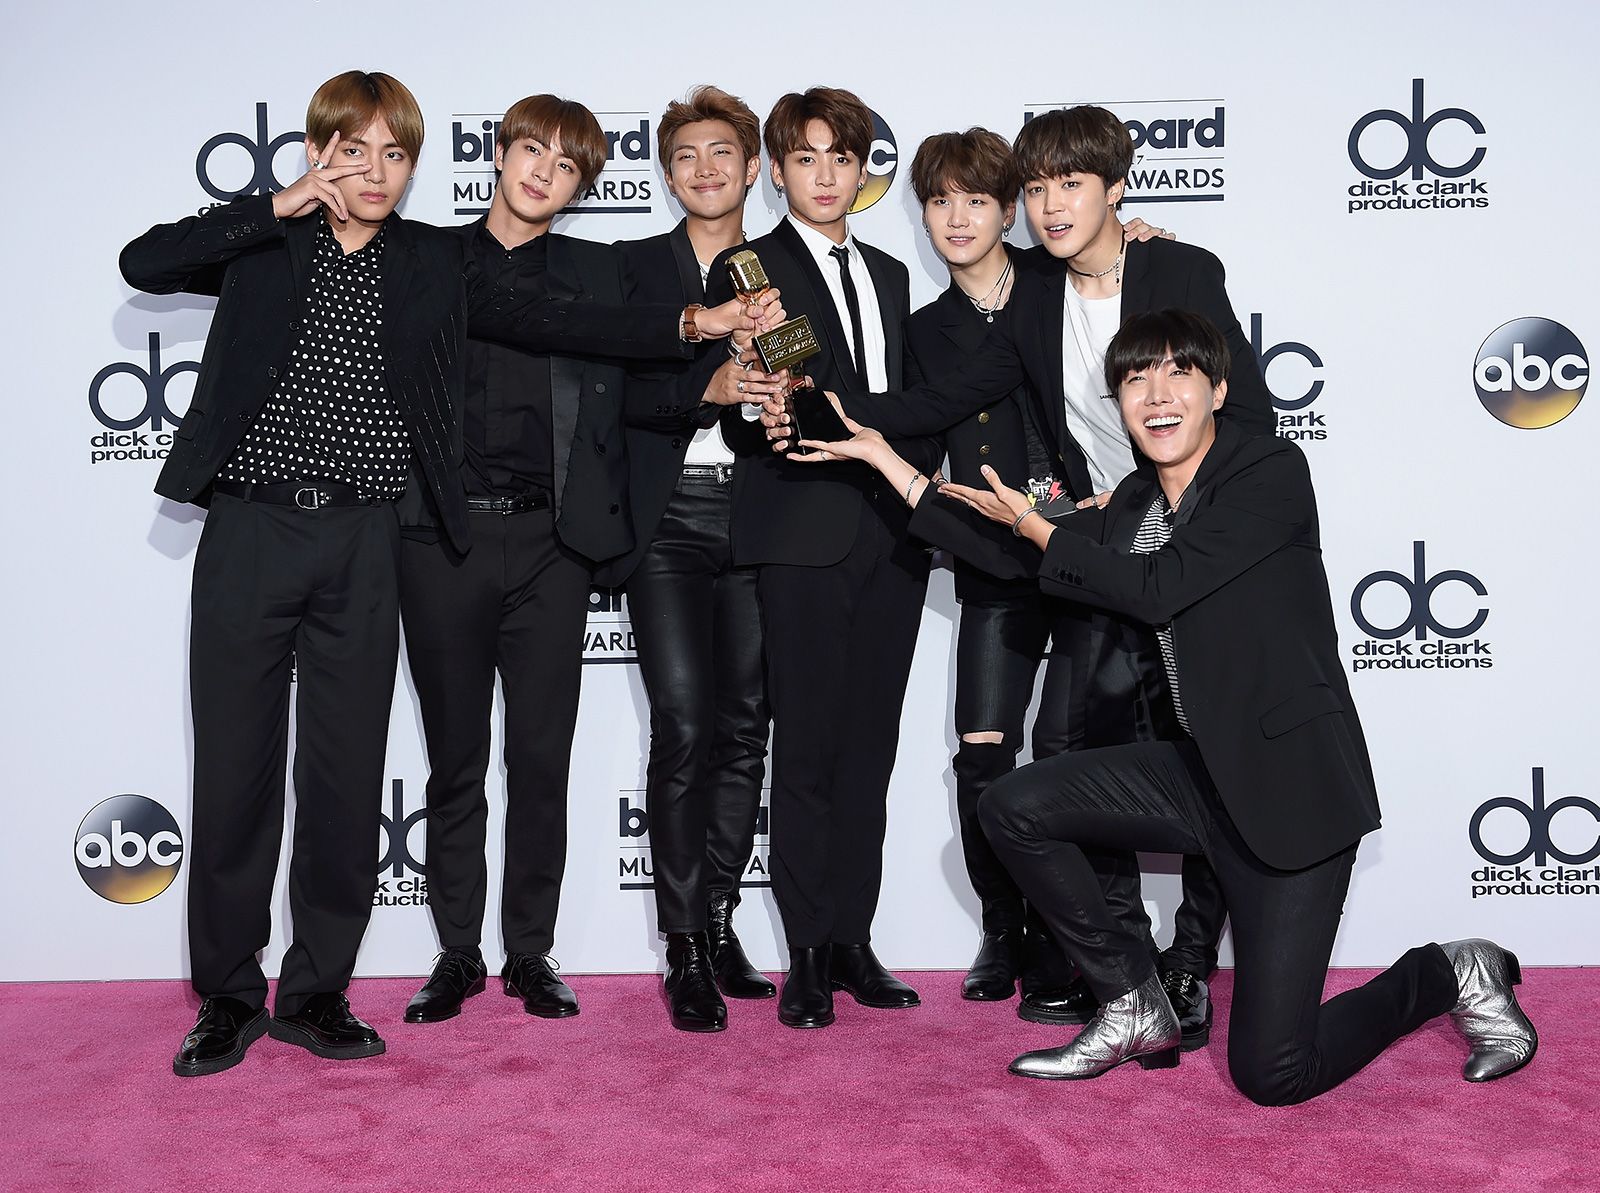 BTS' Style Through the Years: A Look Back at the Fashion, Photos – WWD